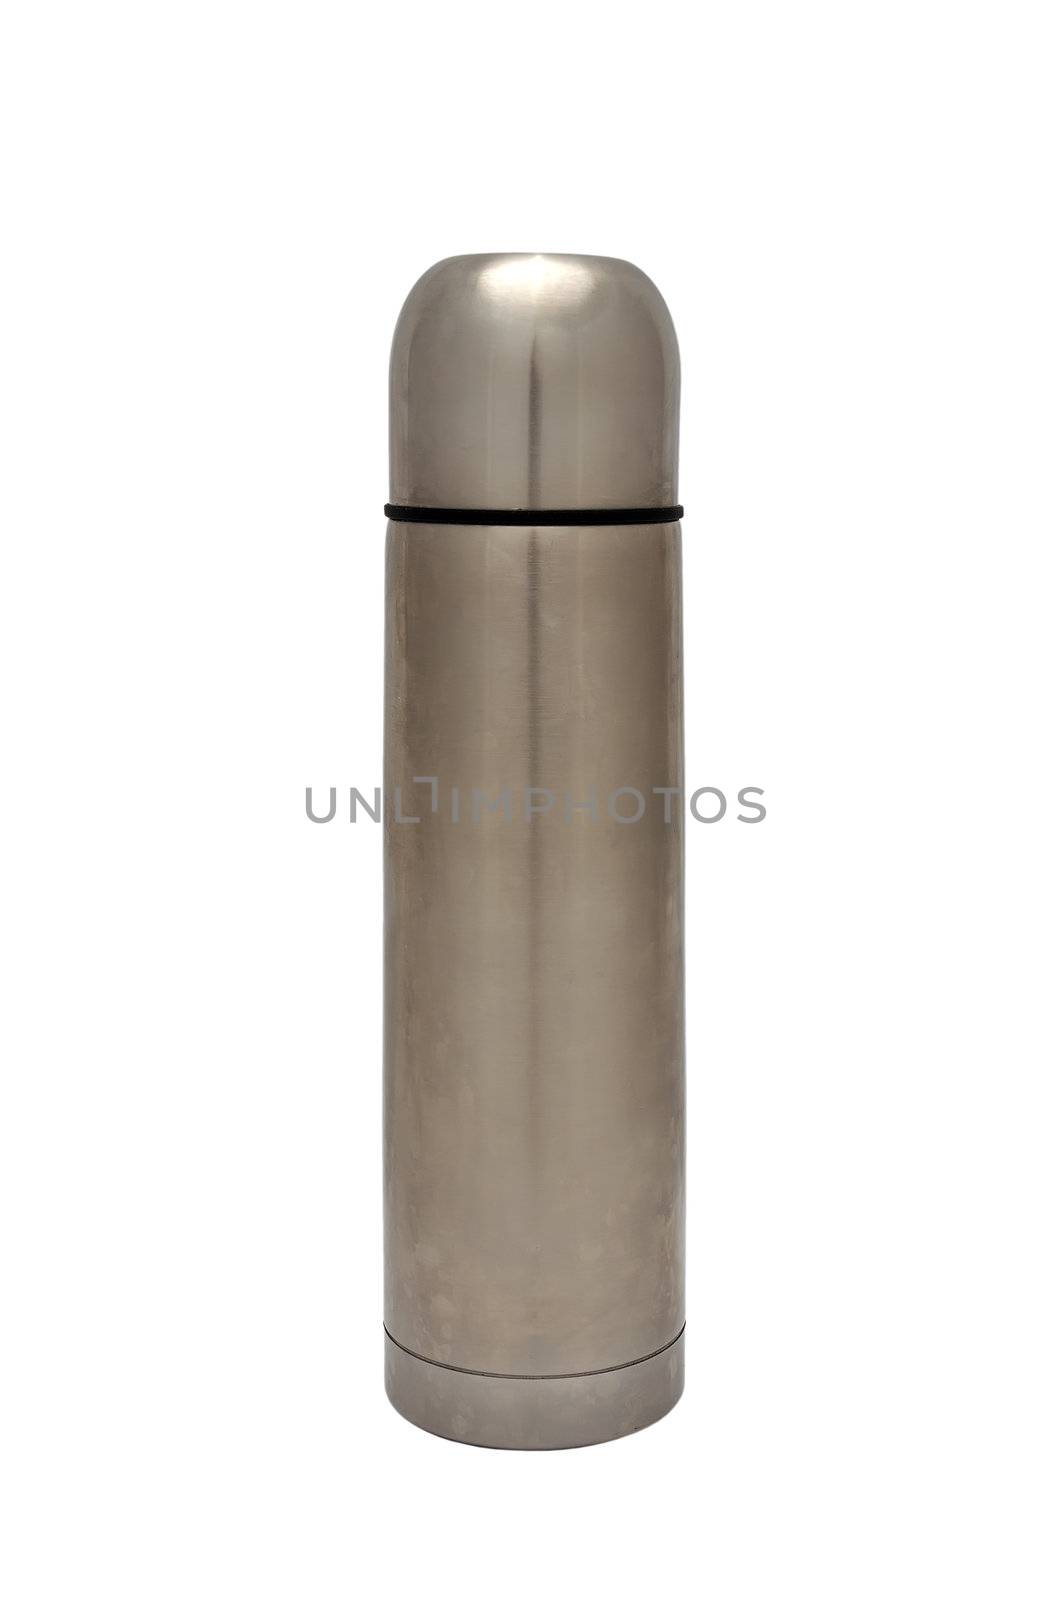 metal thermos on a white background